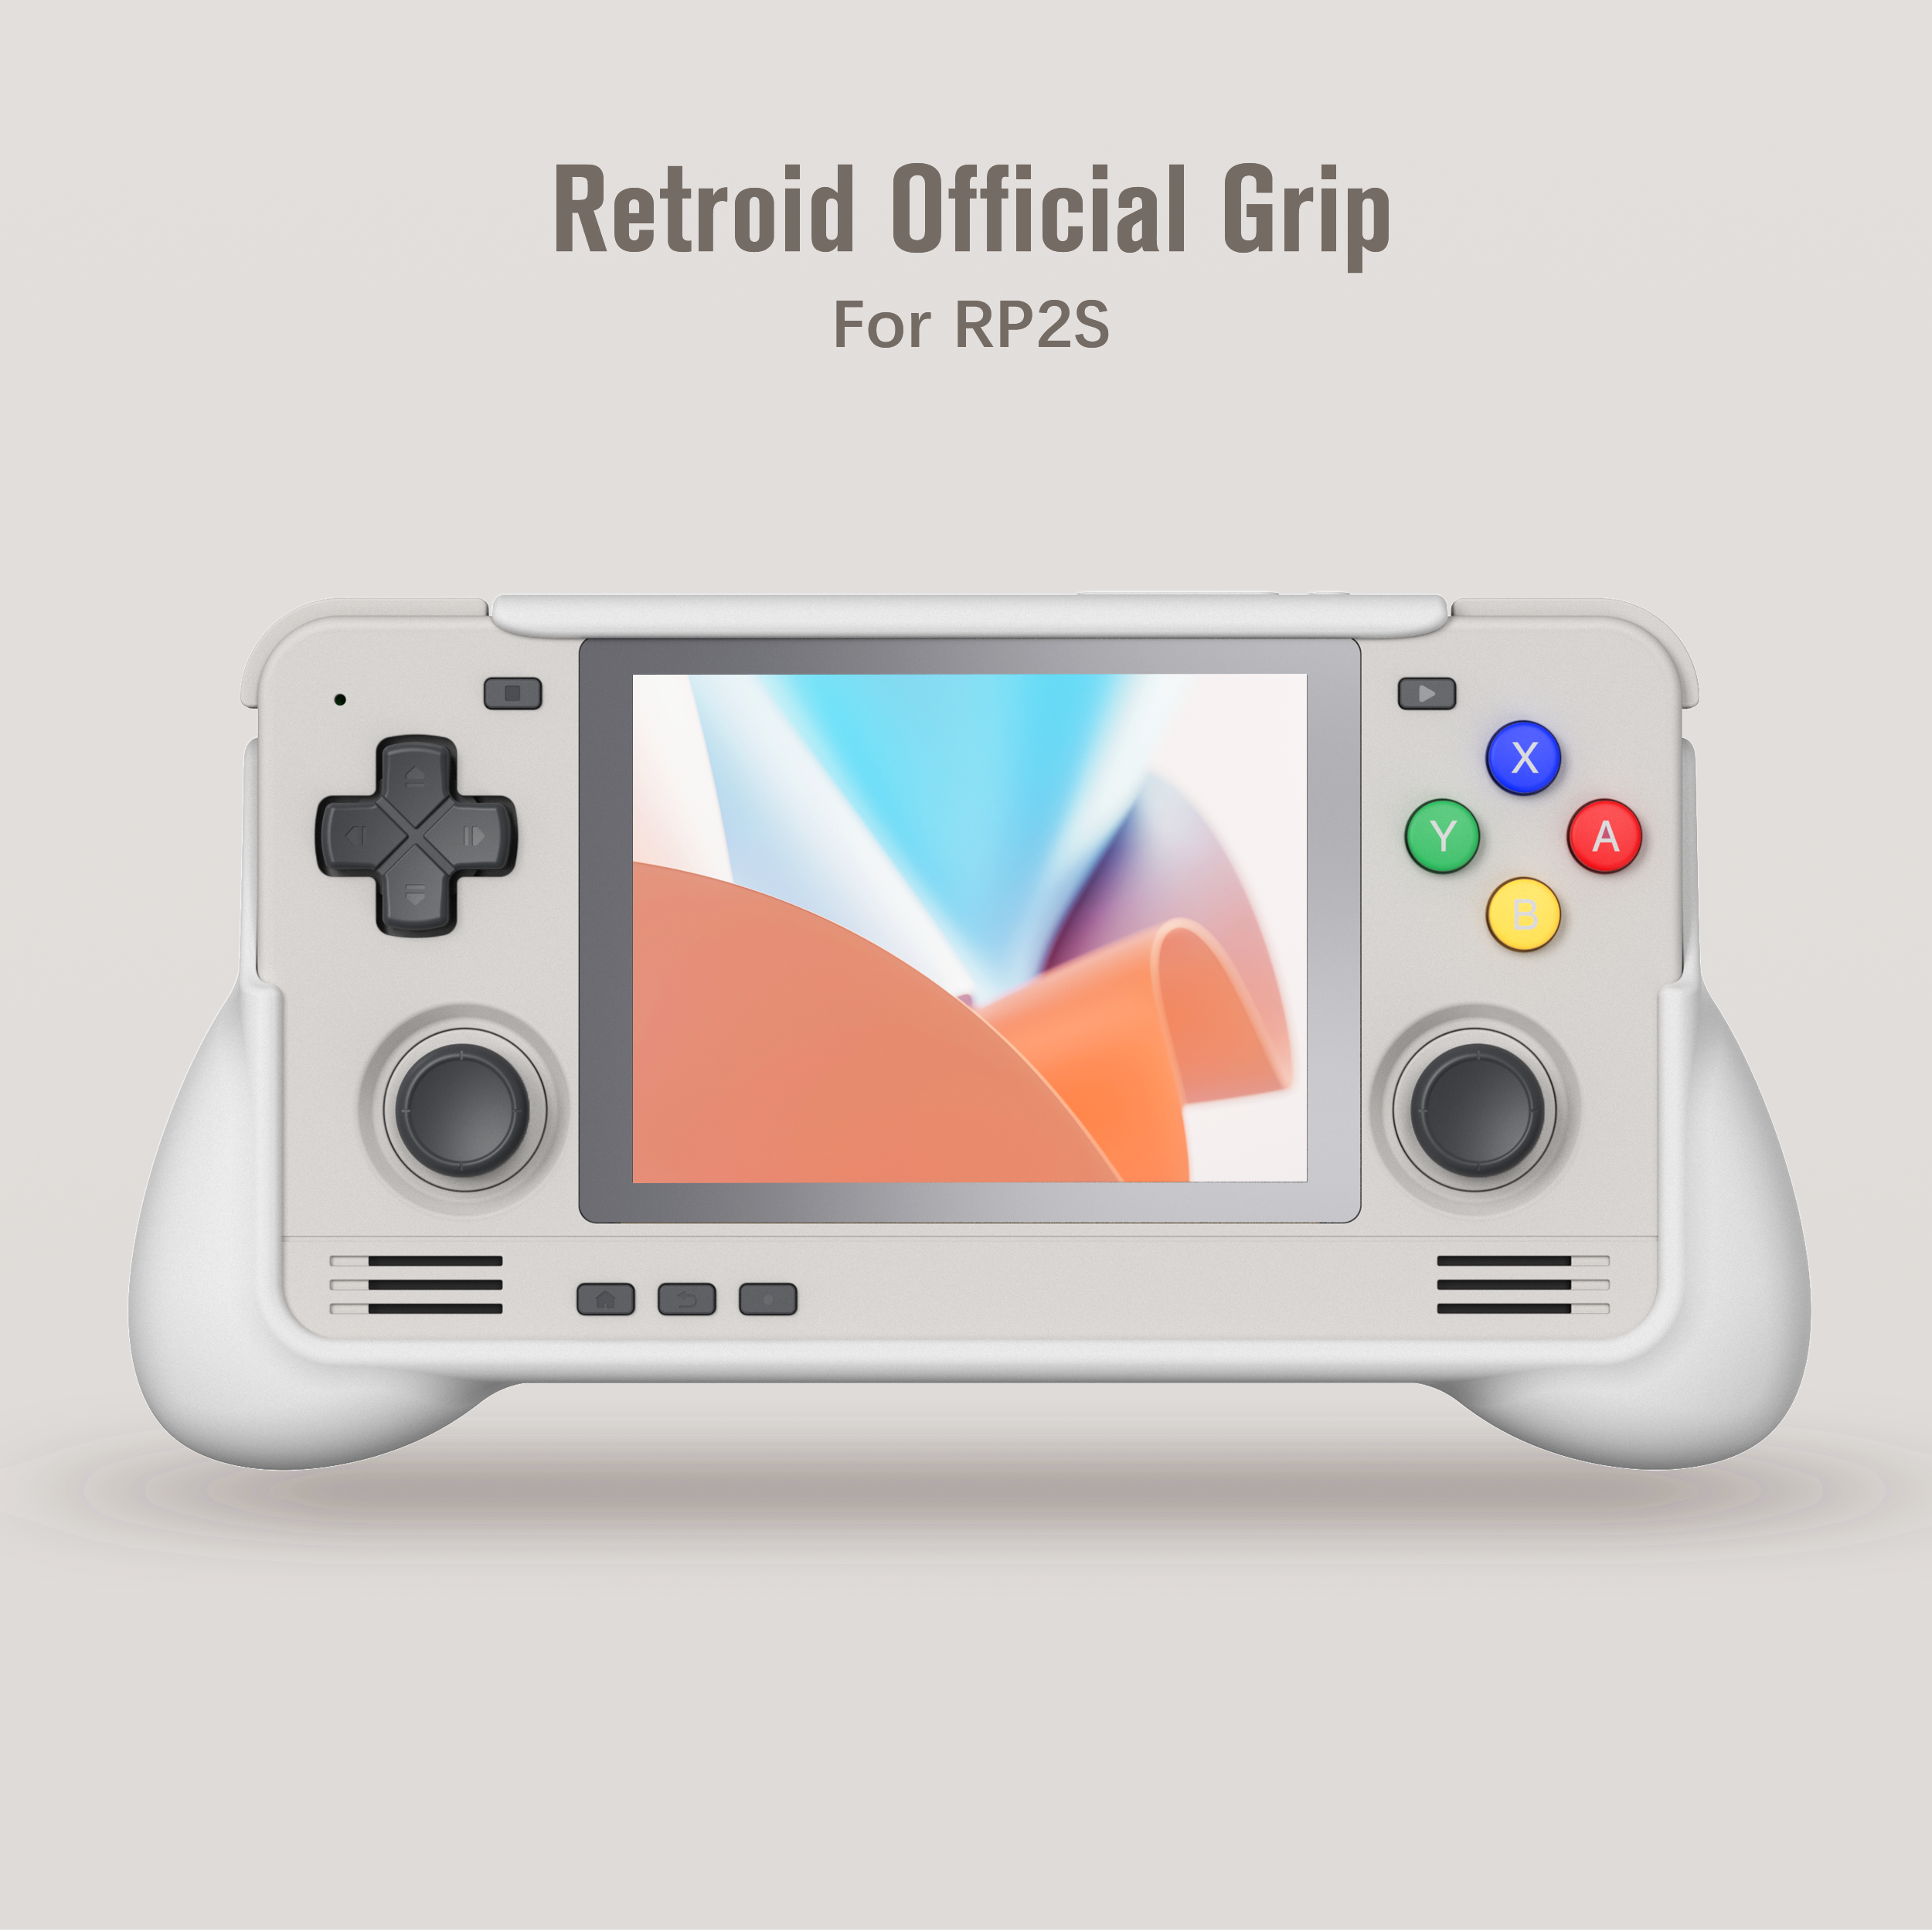 Retroid Official Grip for RP2S – Retroid Pocket